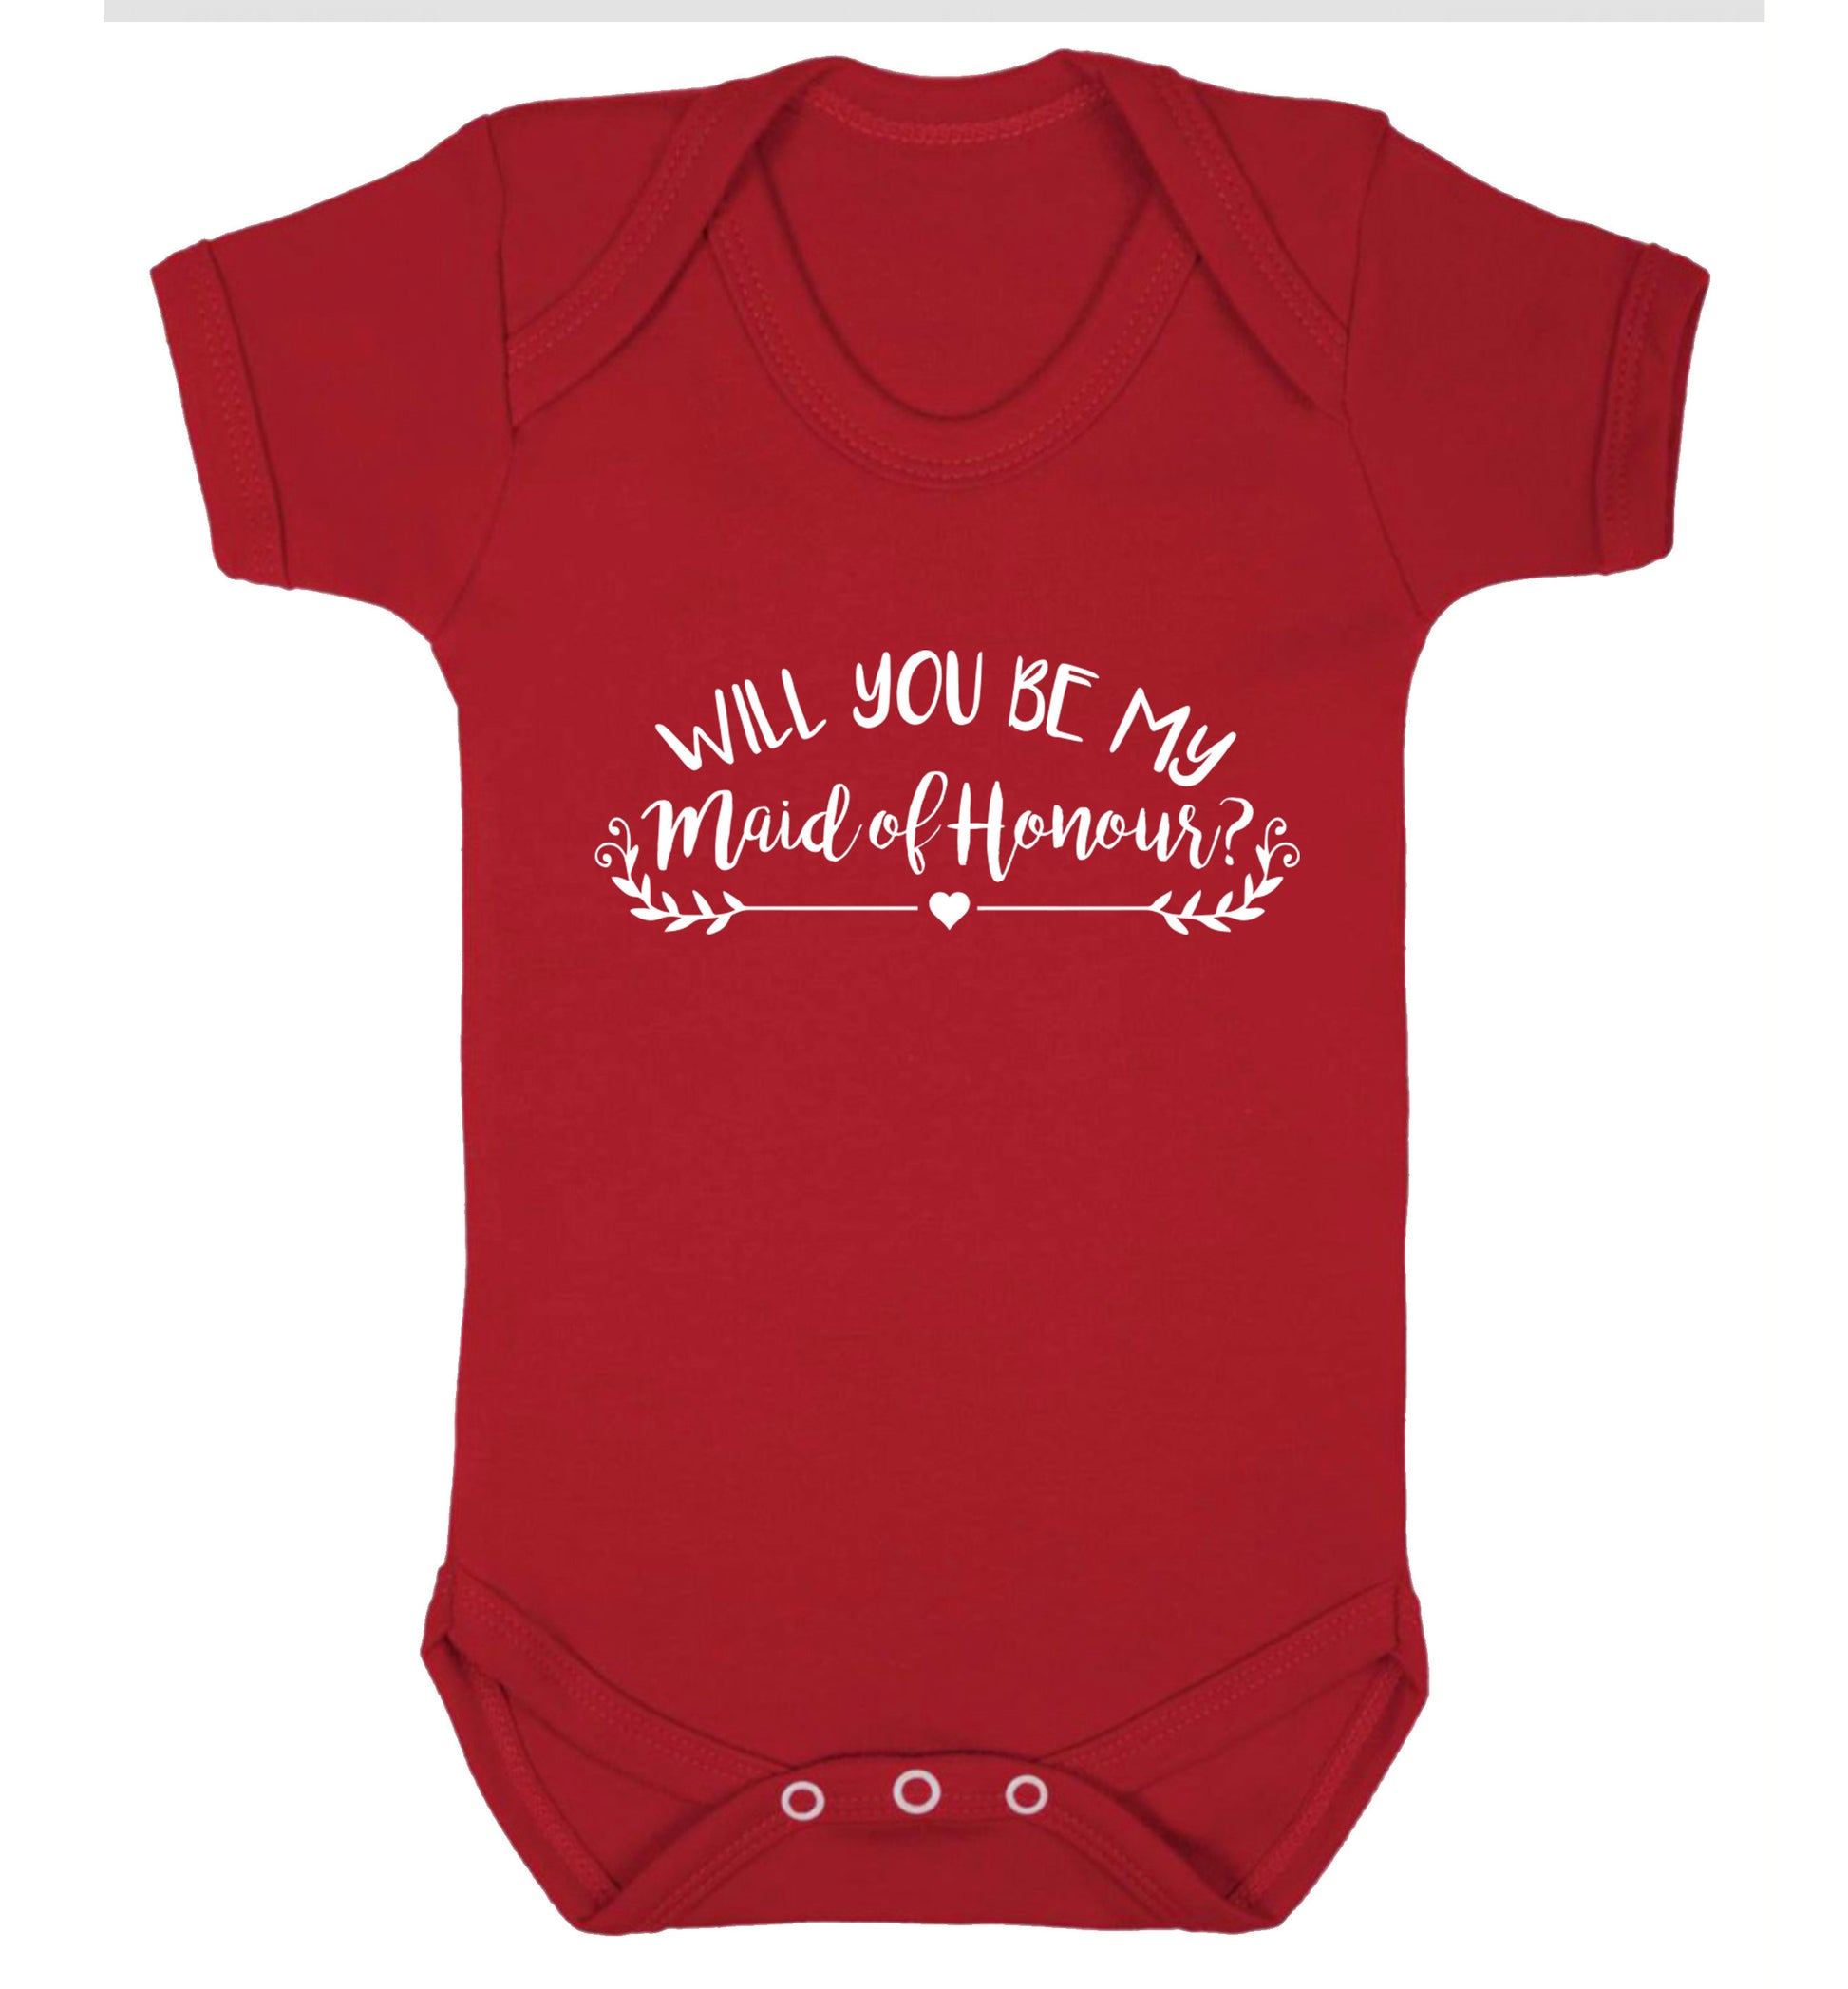 Will you be my maid of honour? Baby Vest red 18-24 months